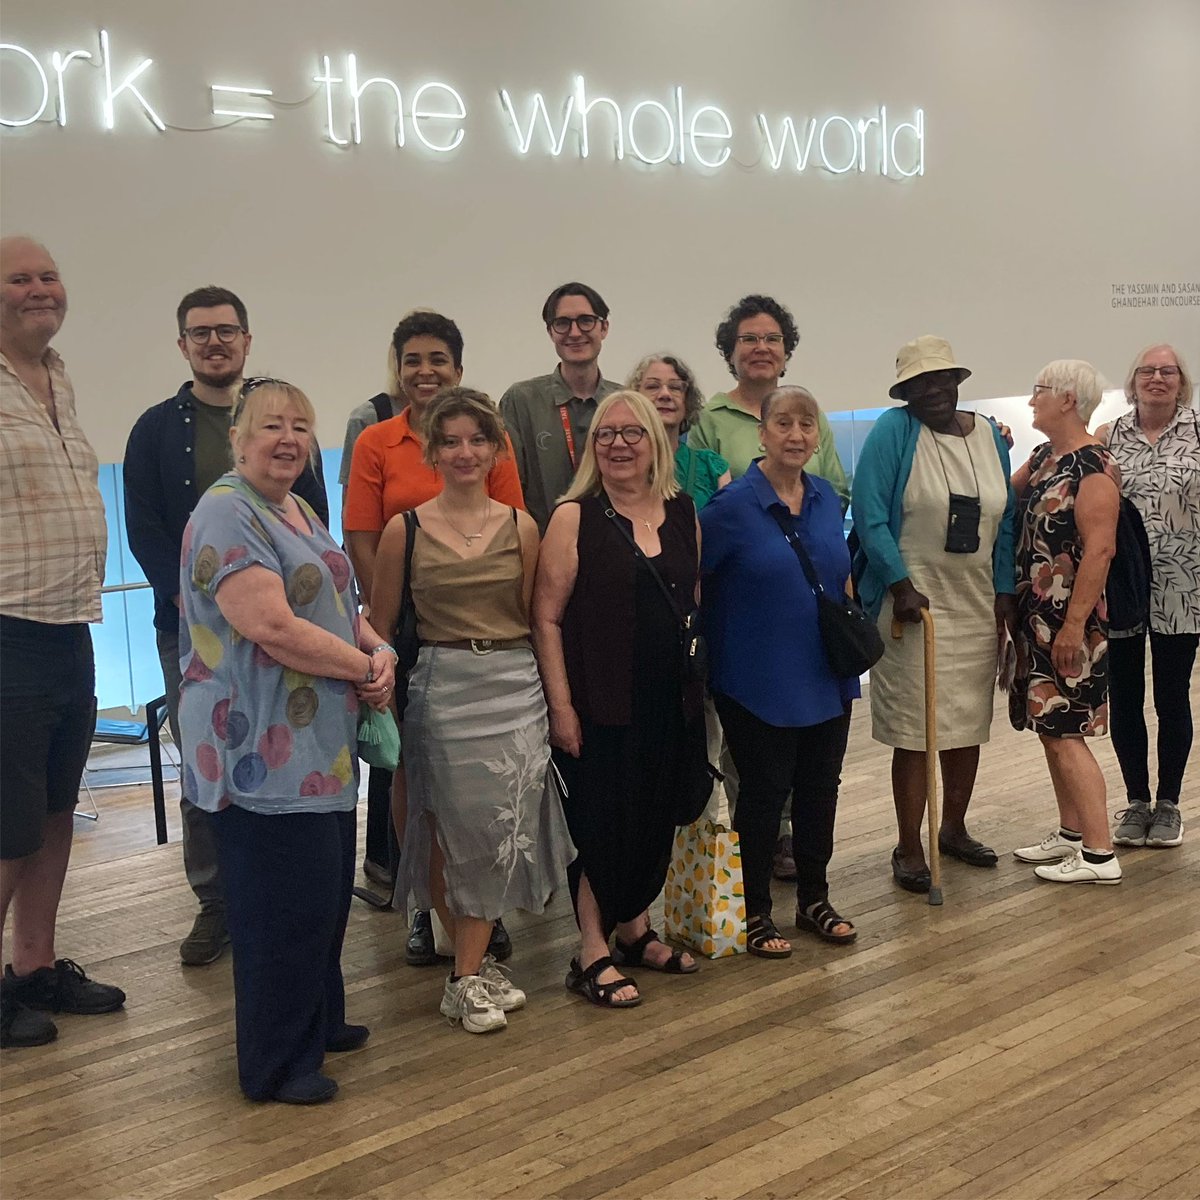 Another snapshot of our wonderful tour of the Tate Modern led by younger neighbour Joe. We are looking forward to our next neighbour-led social club, it is always so special to learn more about our community and their own passions & interests, so lovely when they want to share!